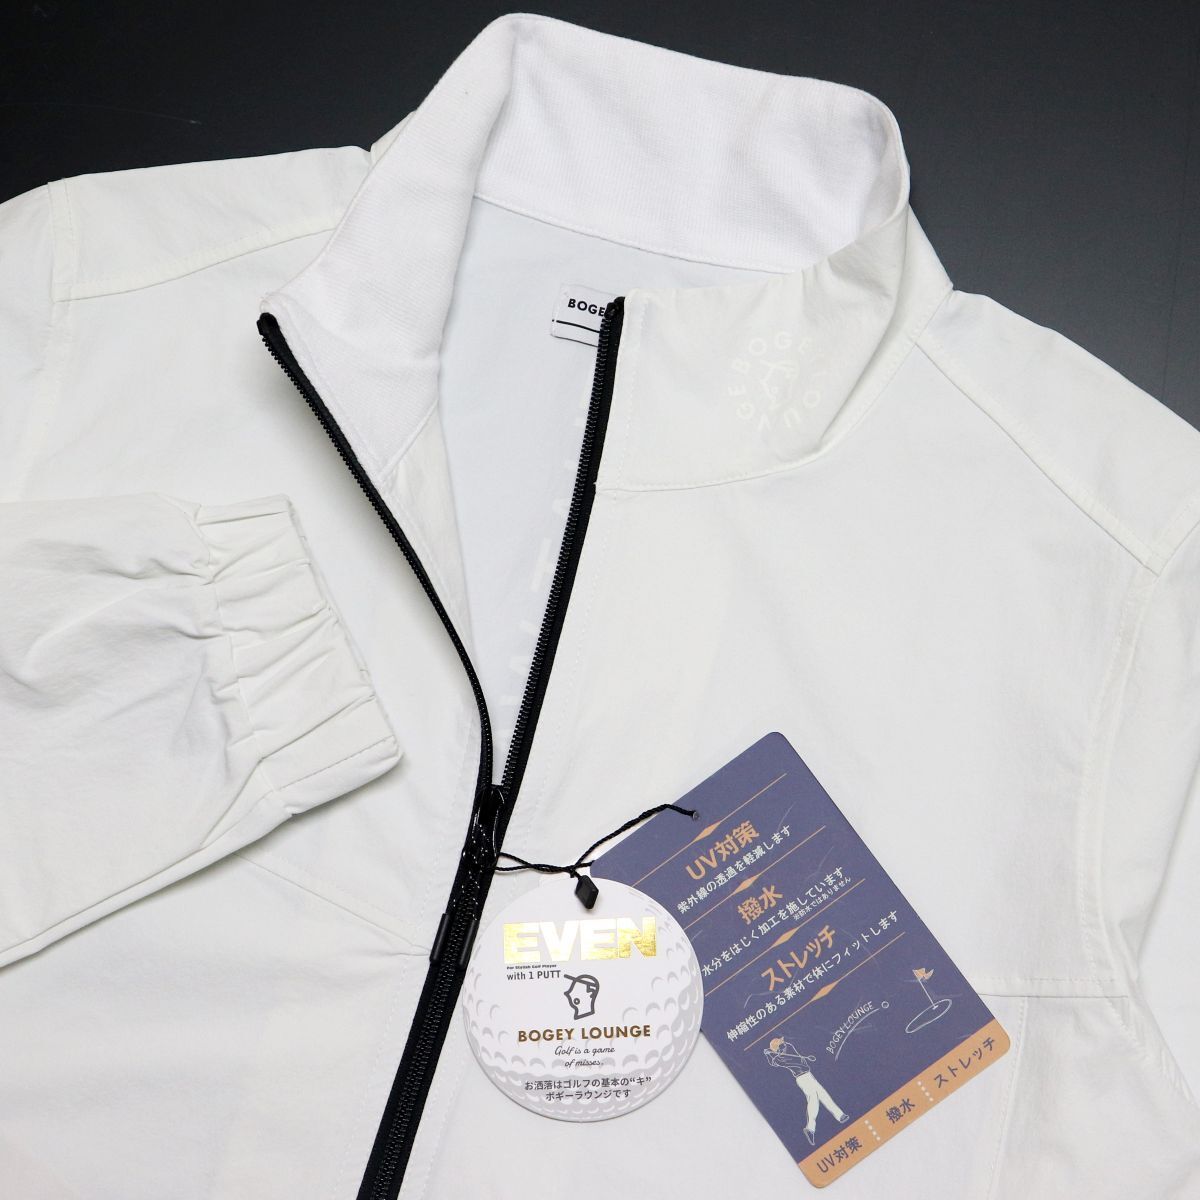 *bogi- lounge Golf EVEN BOGEY LOUNGE GOLF new goods men's UV water-repellent stretch jacket white spring thing [3F101128BG-09-M] one two .*QWER*